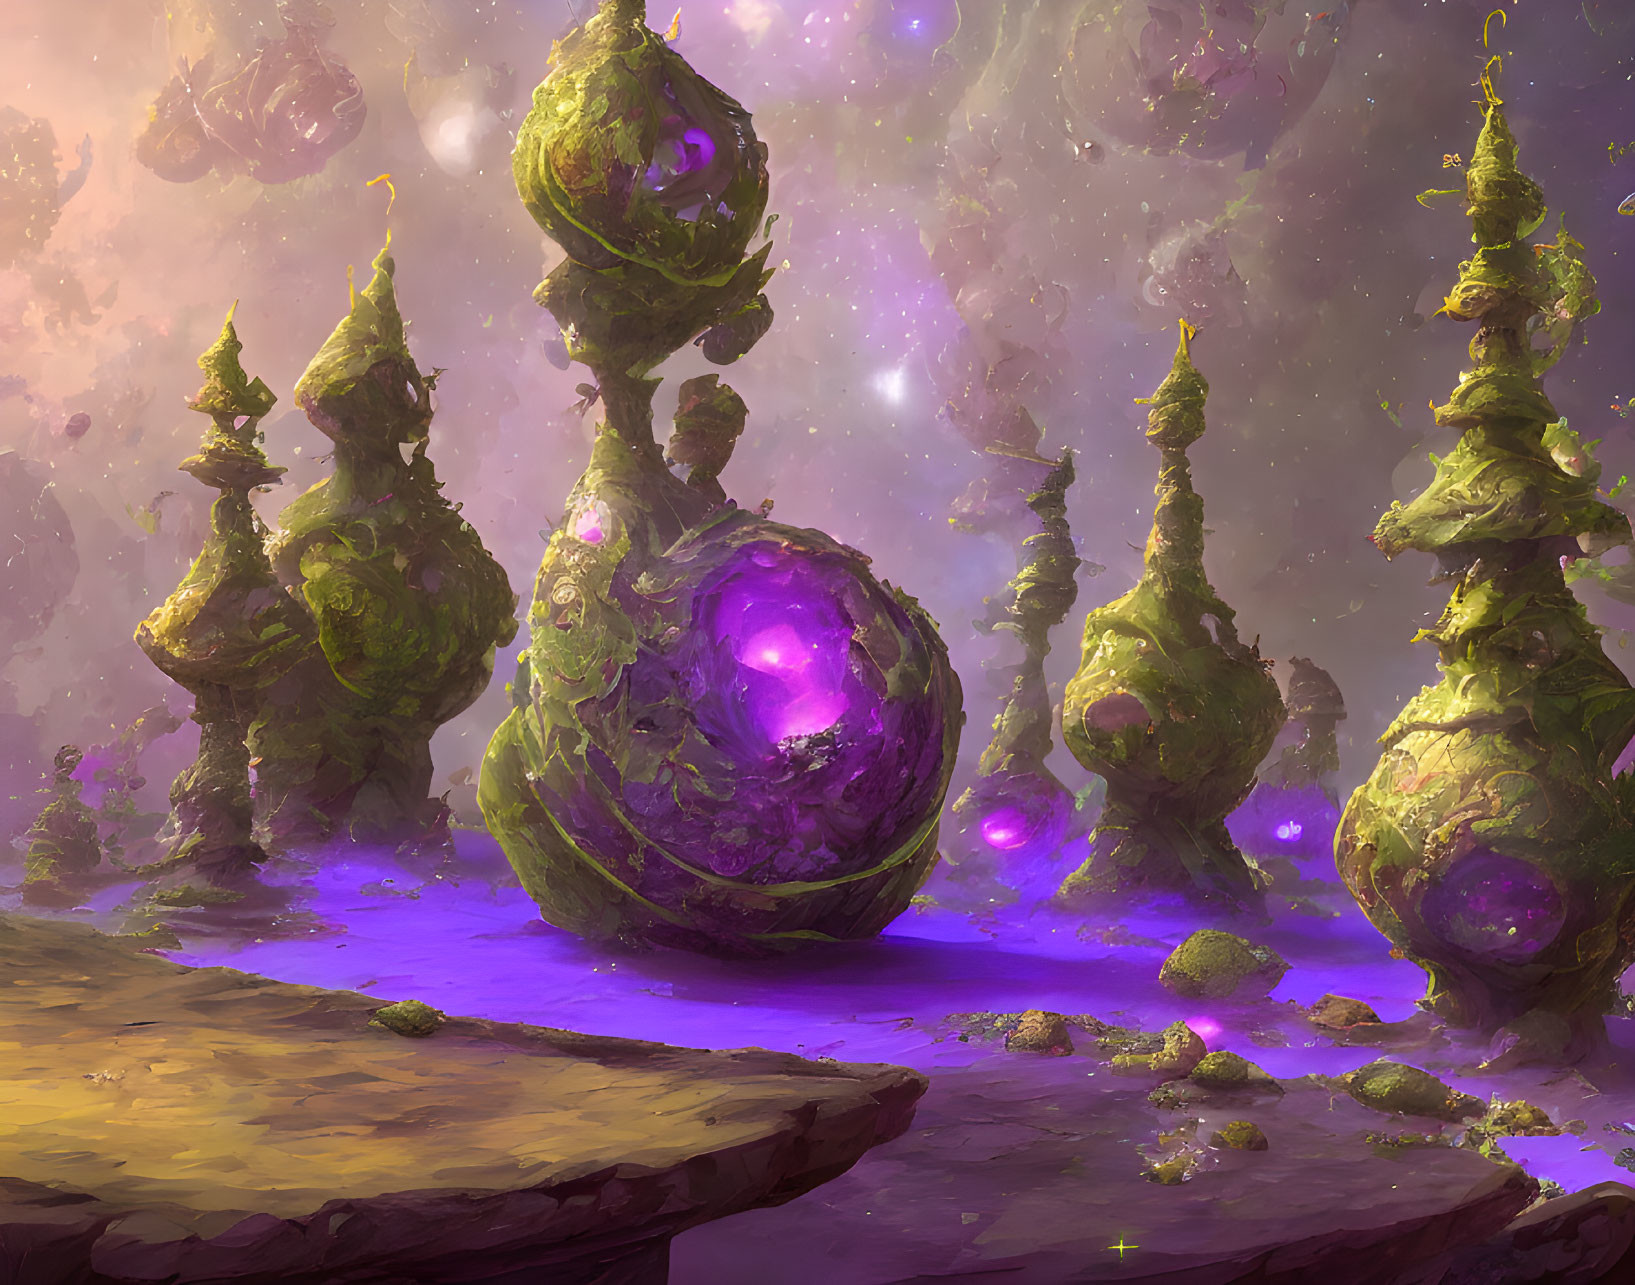 Mystical landscape with green rock formations and glowing purple orbs under mauve sky